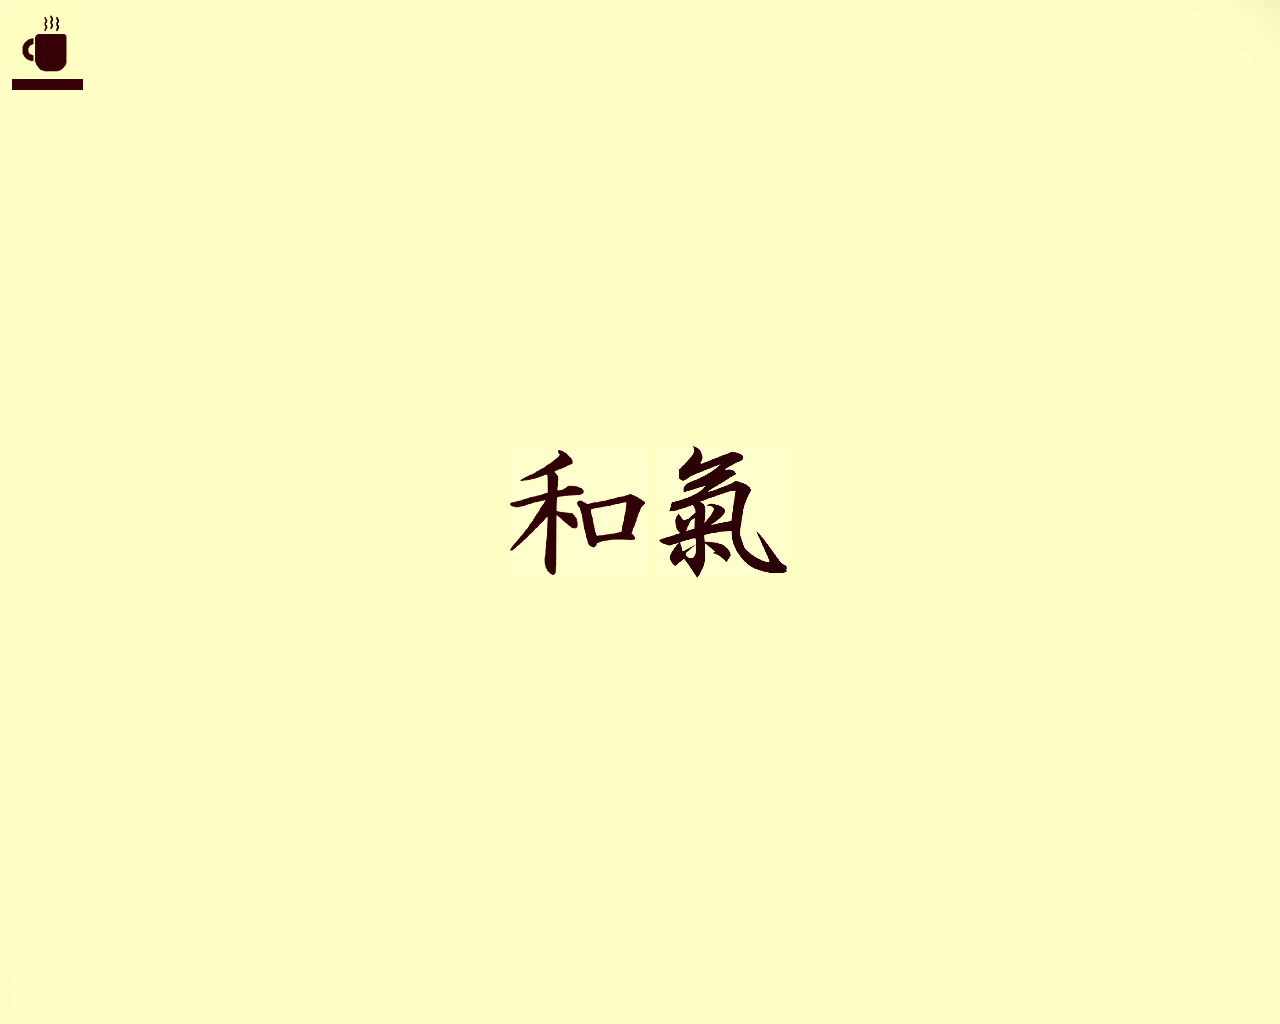 Minimalism Vintage Chinese Characters 1280x1024